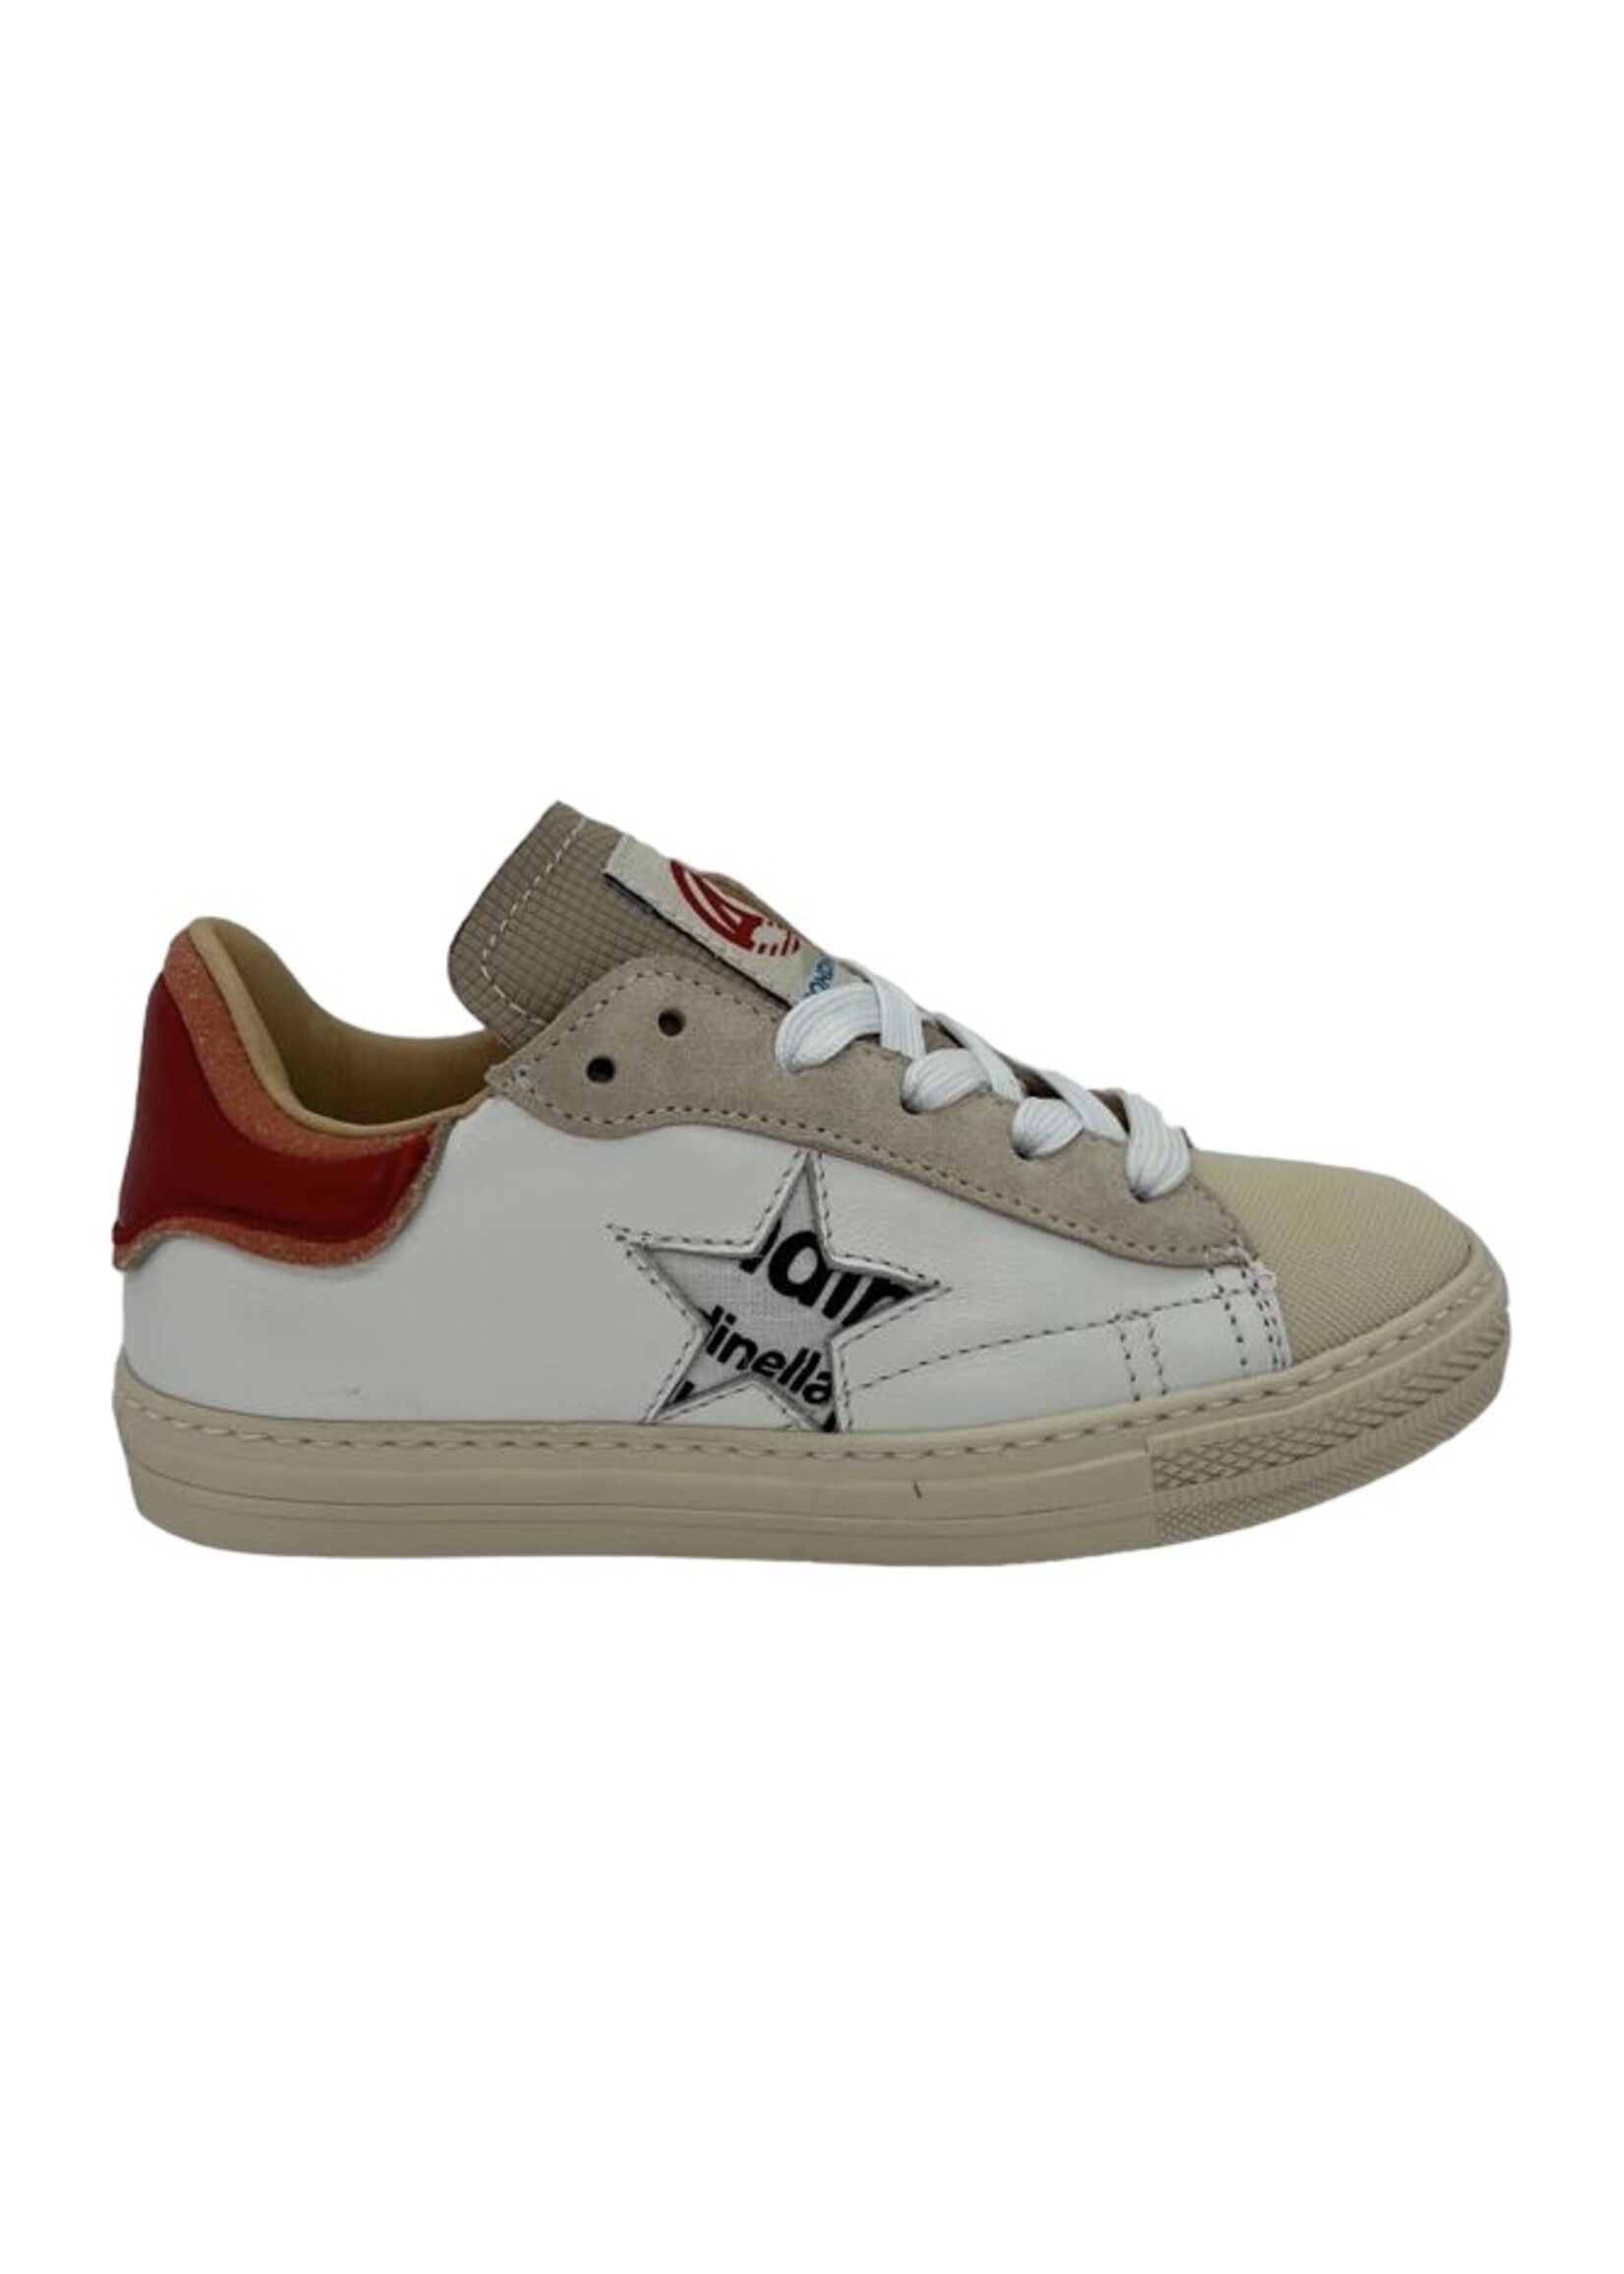 Rondinella 12068 sneaker wit rood